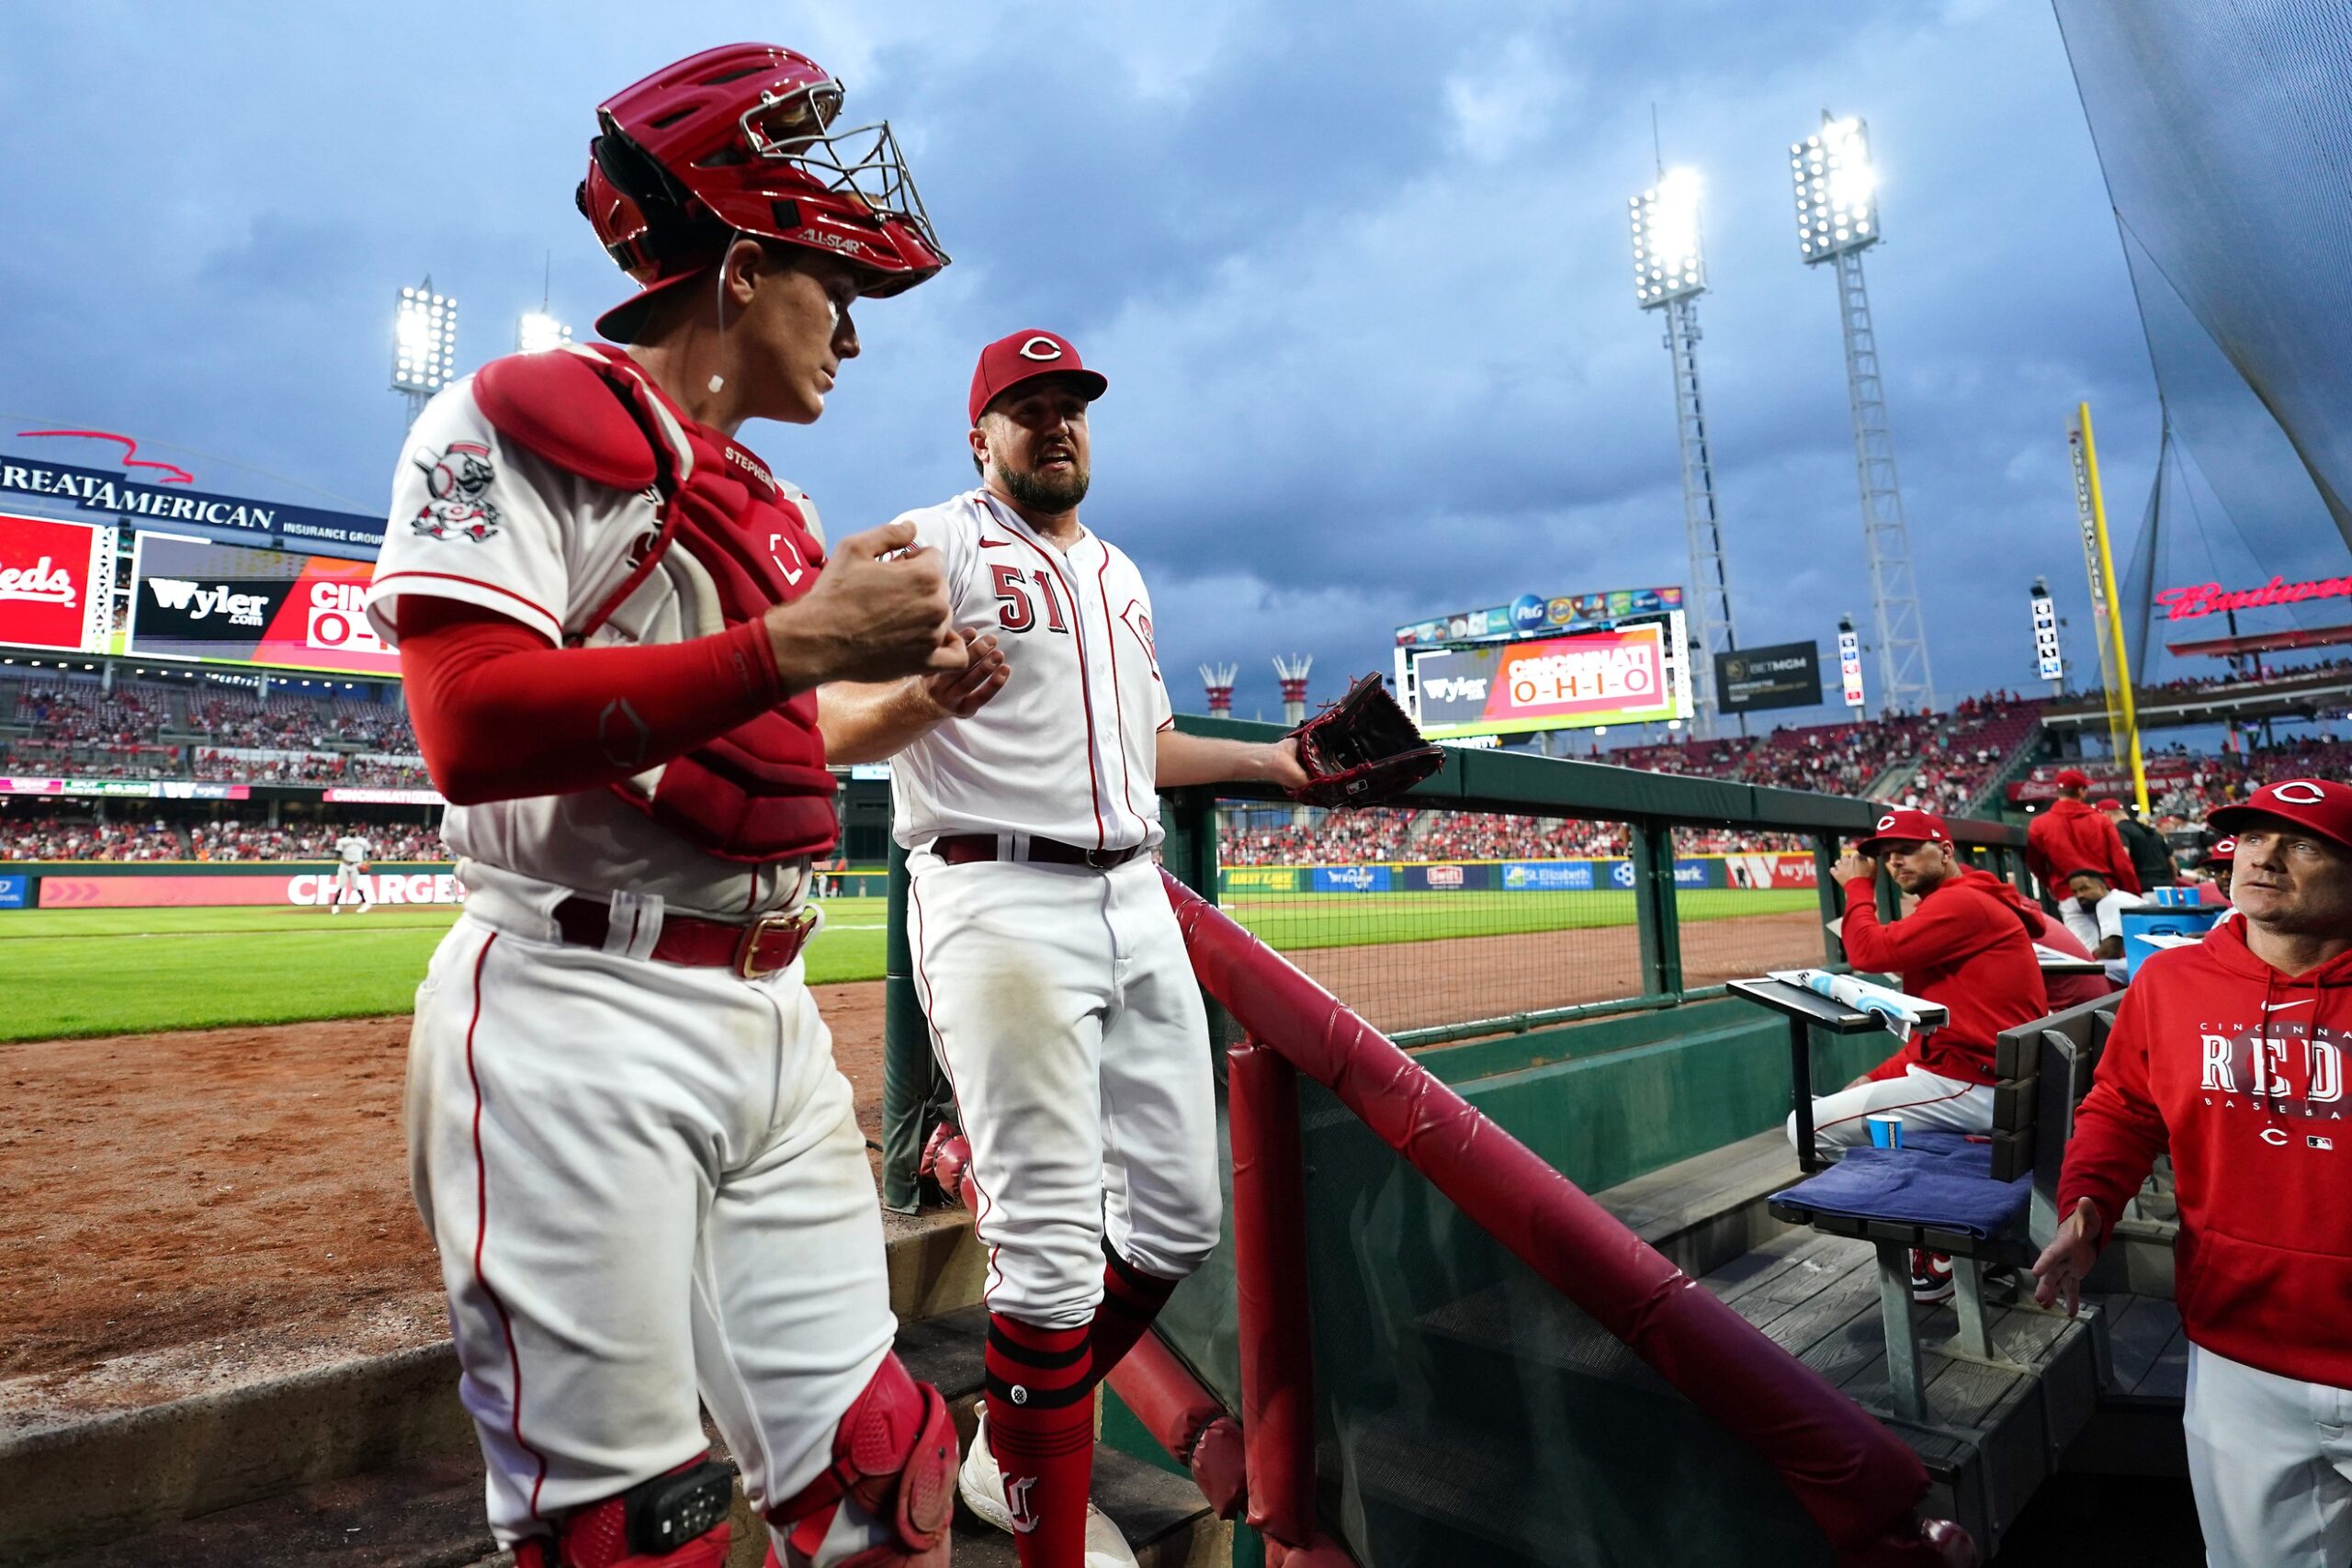 Cincinnati Reds Opening Day Starter To Make 1st Start After Lengthy IL Stint On Sunday, August 20